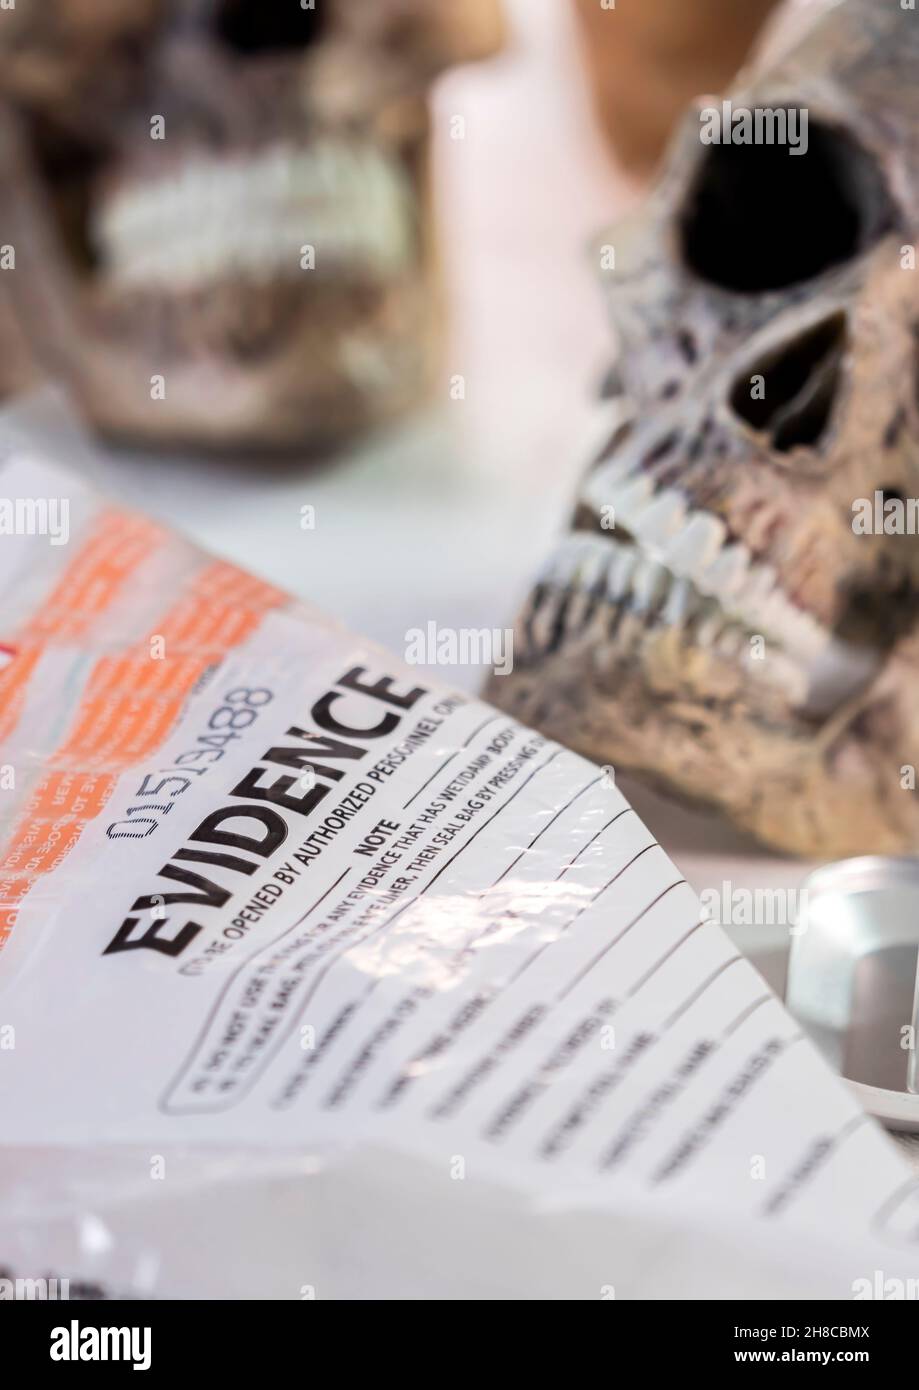 Skull of adult human next to an evidence bag in forensic laboratory, conceptual image. Stock Photo